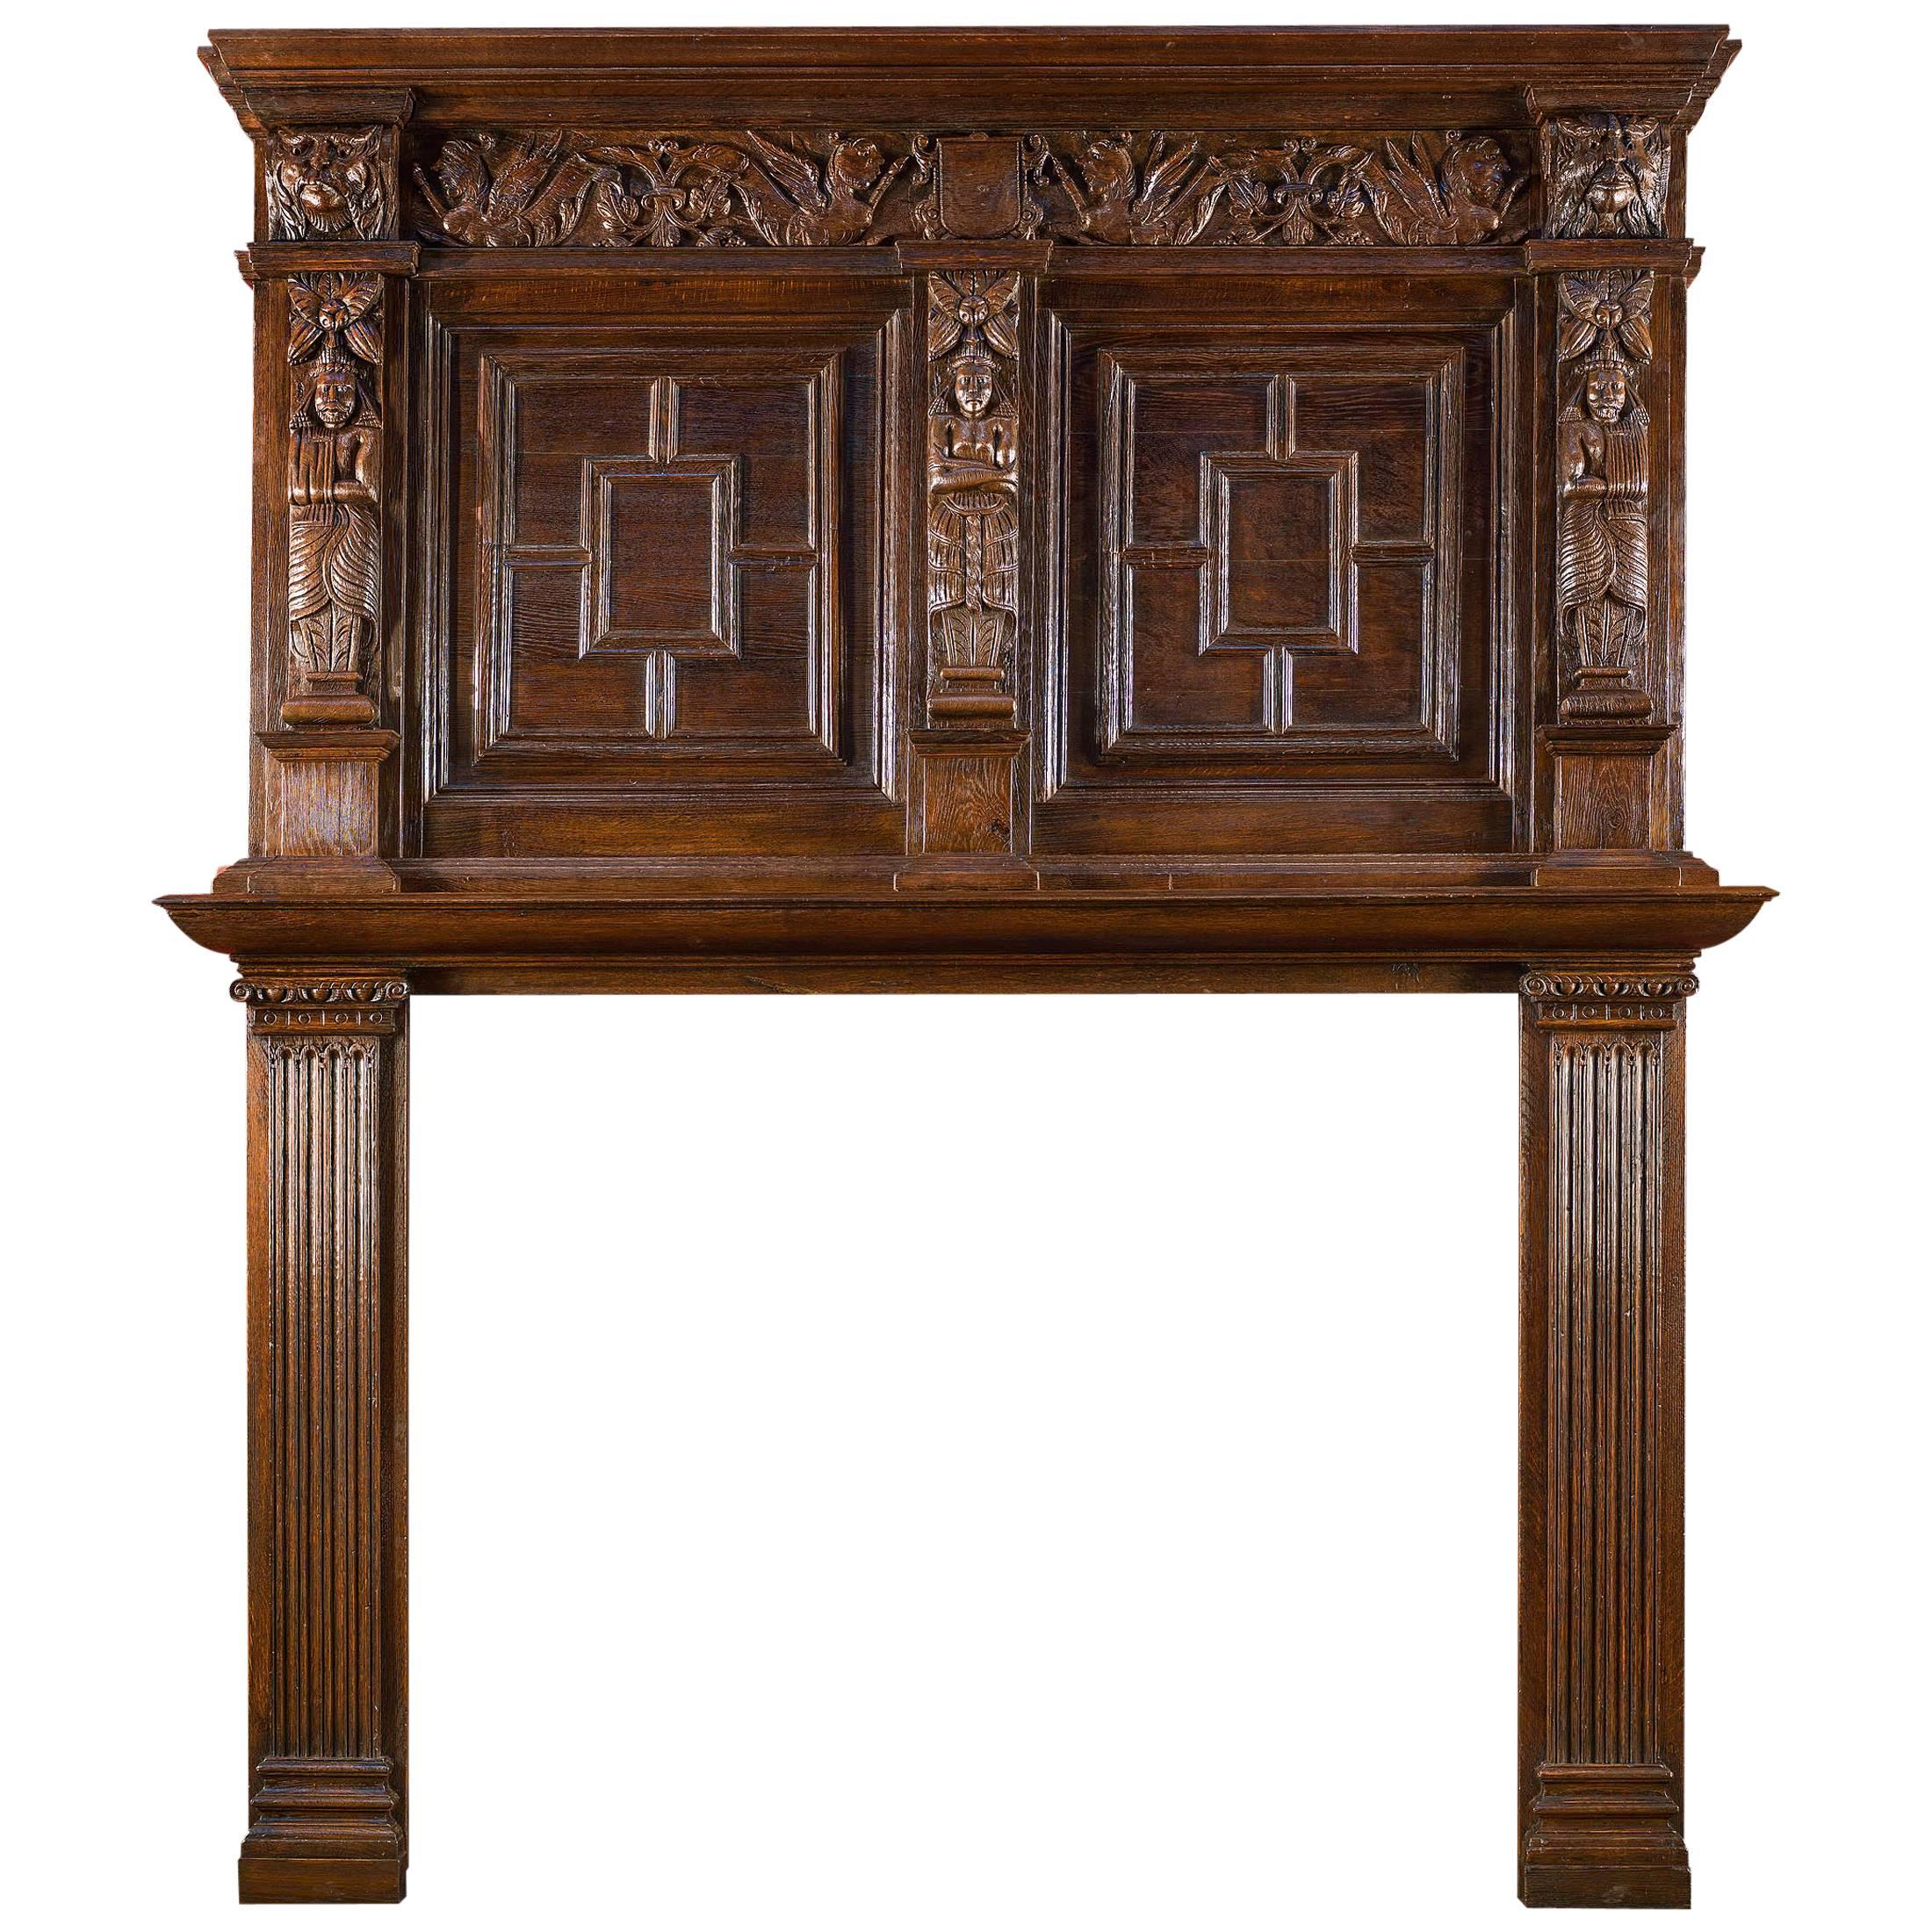 Tall Antique English Carved Oak Antique Fireplace Mantel